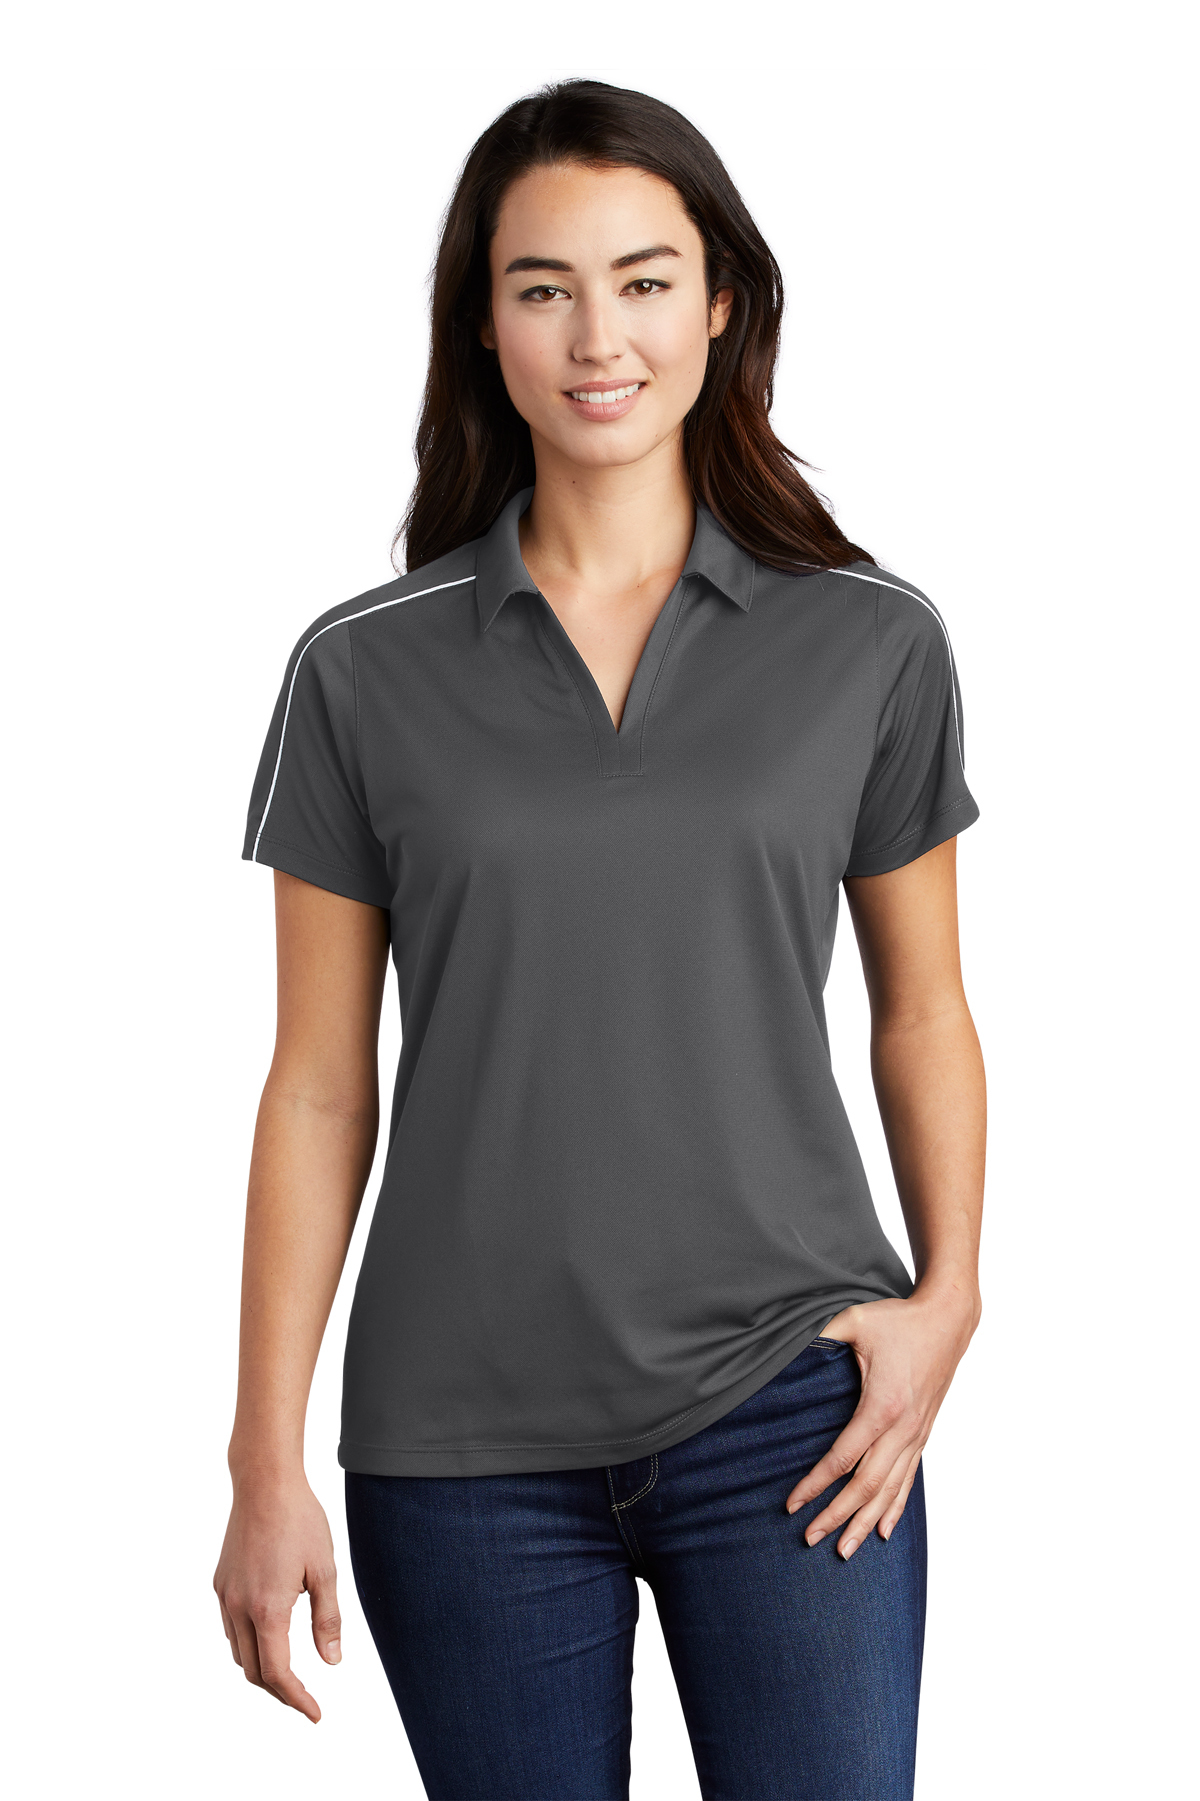 Sport-Tek<SUP>®</SUP> Sport-Wick<SUP>®</SUP> Piped Micropique Product Ladies Polo |